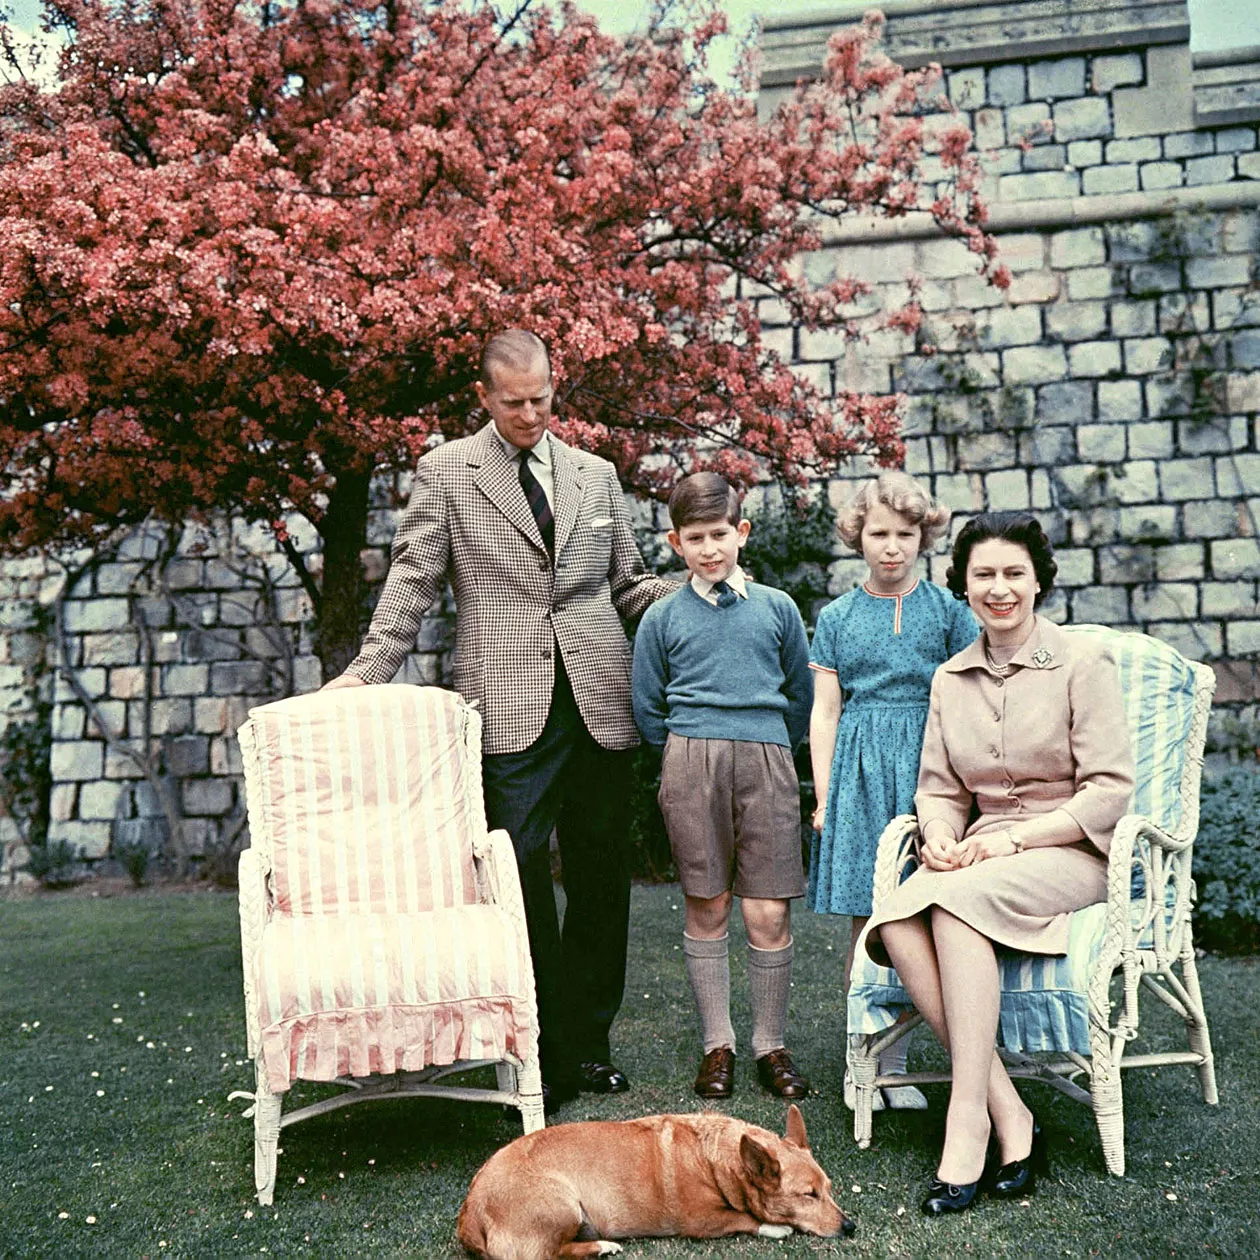 The royal family pictured in the garden of the private apartments at Windsor Castle in spring, 1959. L-R: Prince Philip the Duke of Edinburgh, Prince Charles The Prince Of Wales, Princess Anne The Princess Royal, HM the Queen. 